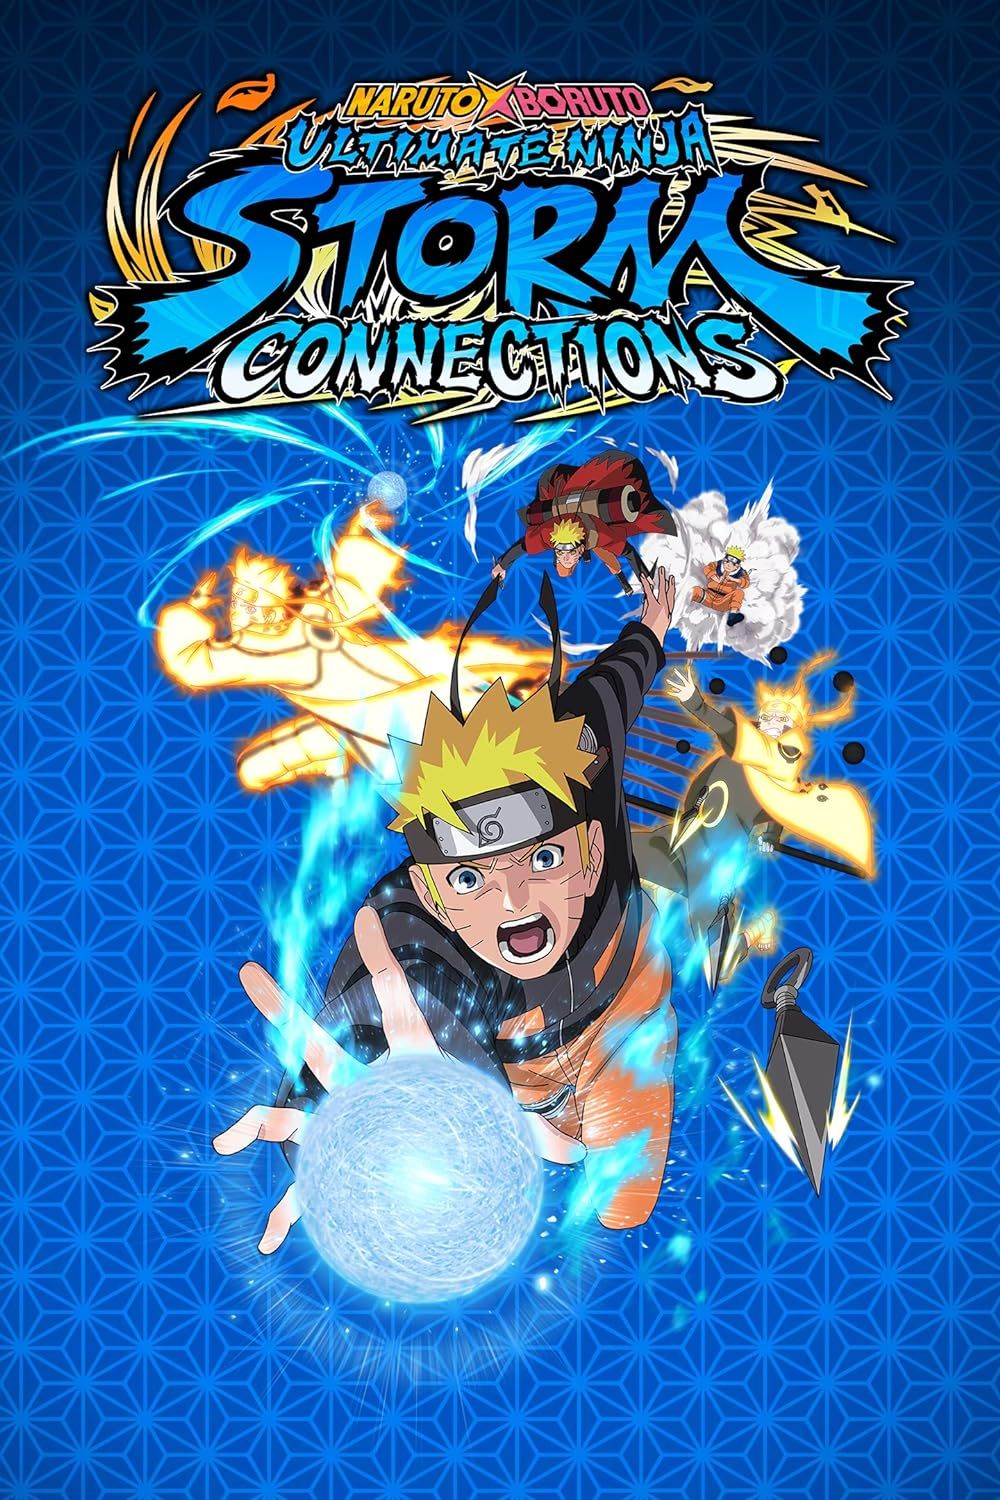 All Game Modes In Naruto X Boruto Ultimate Ninja Storm Connections Explained